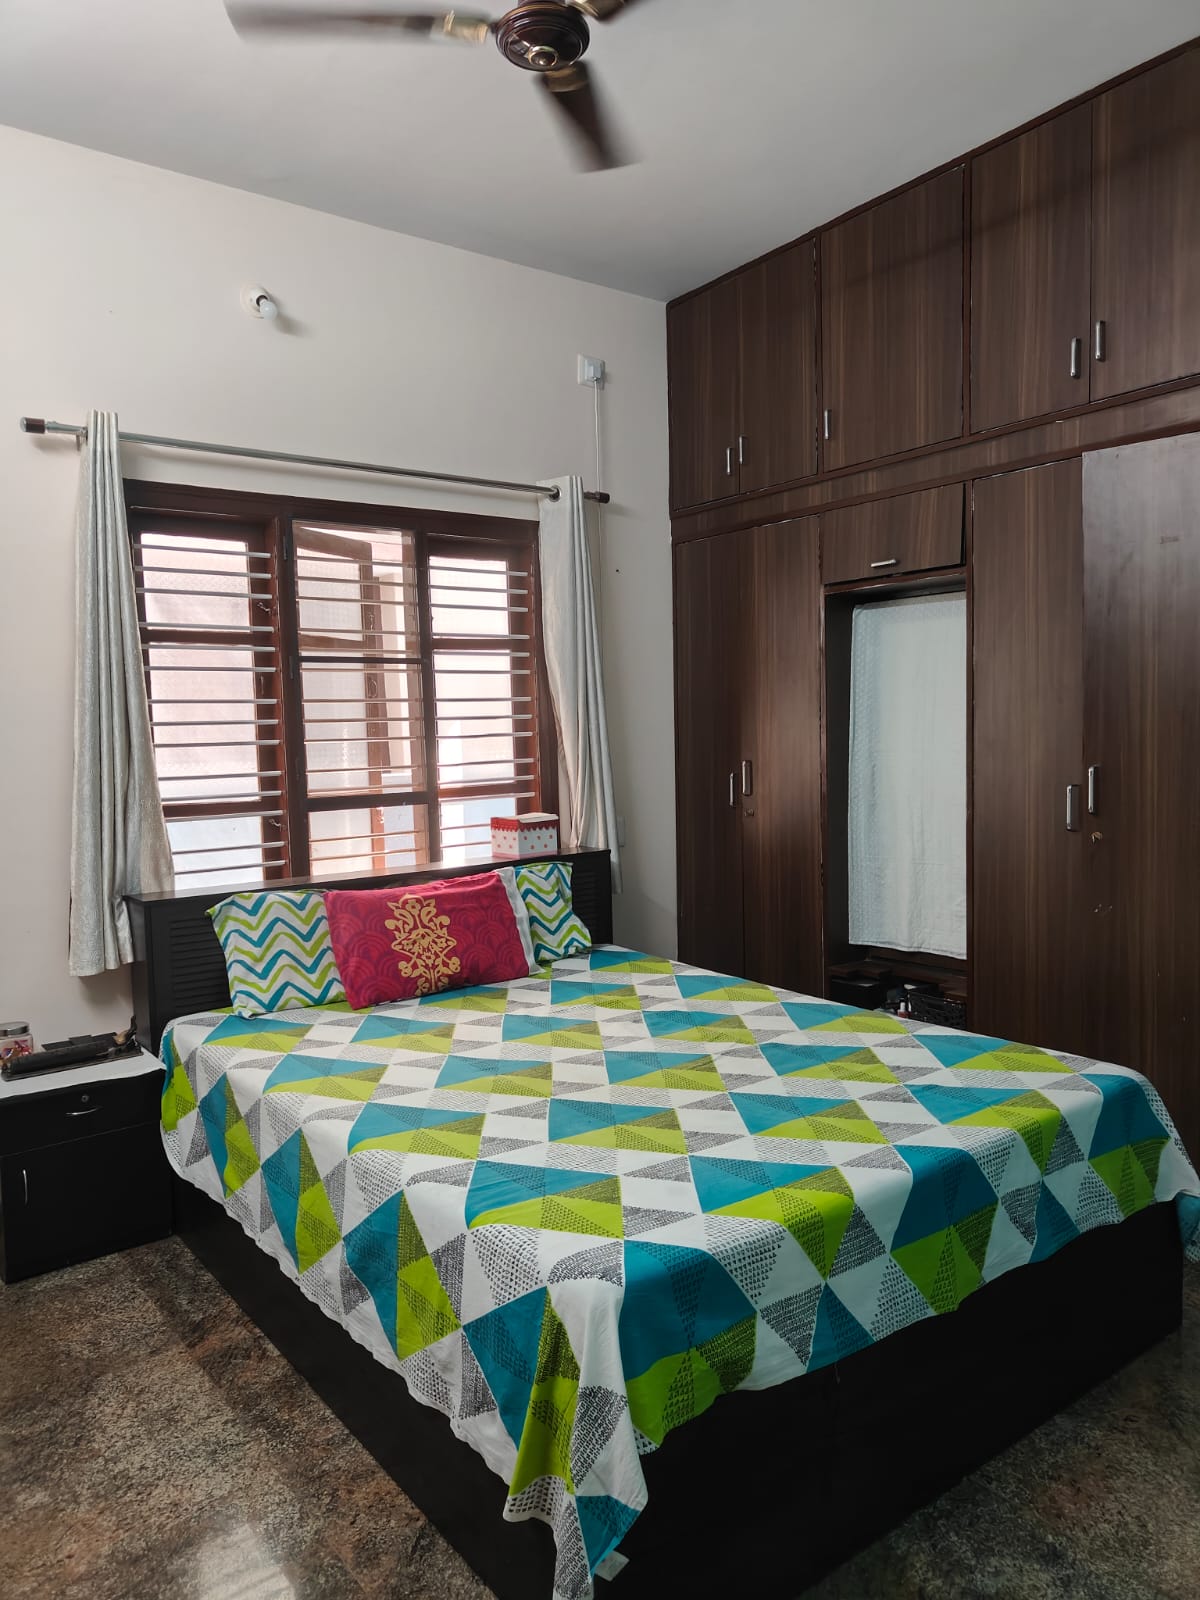 2 BHK Independent House for Lease Only at JAML2 - 3428 in Ramamurthy Nagar